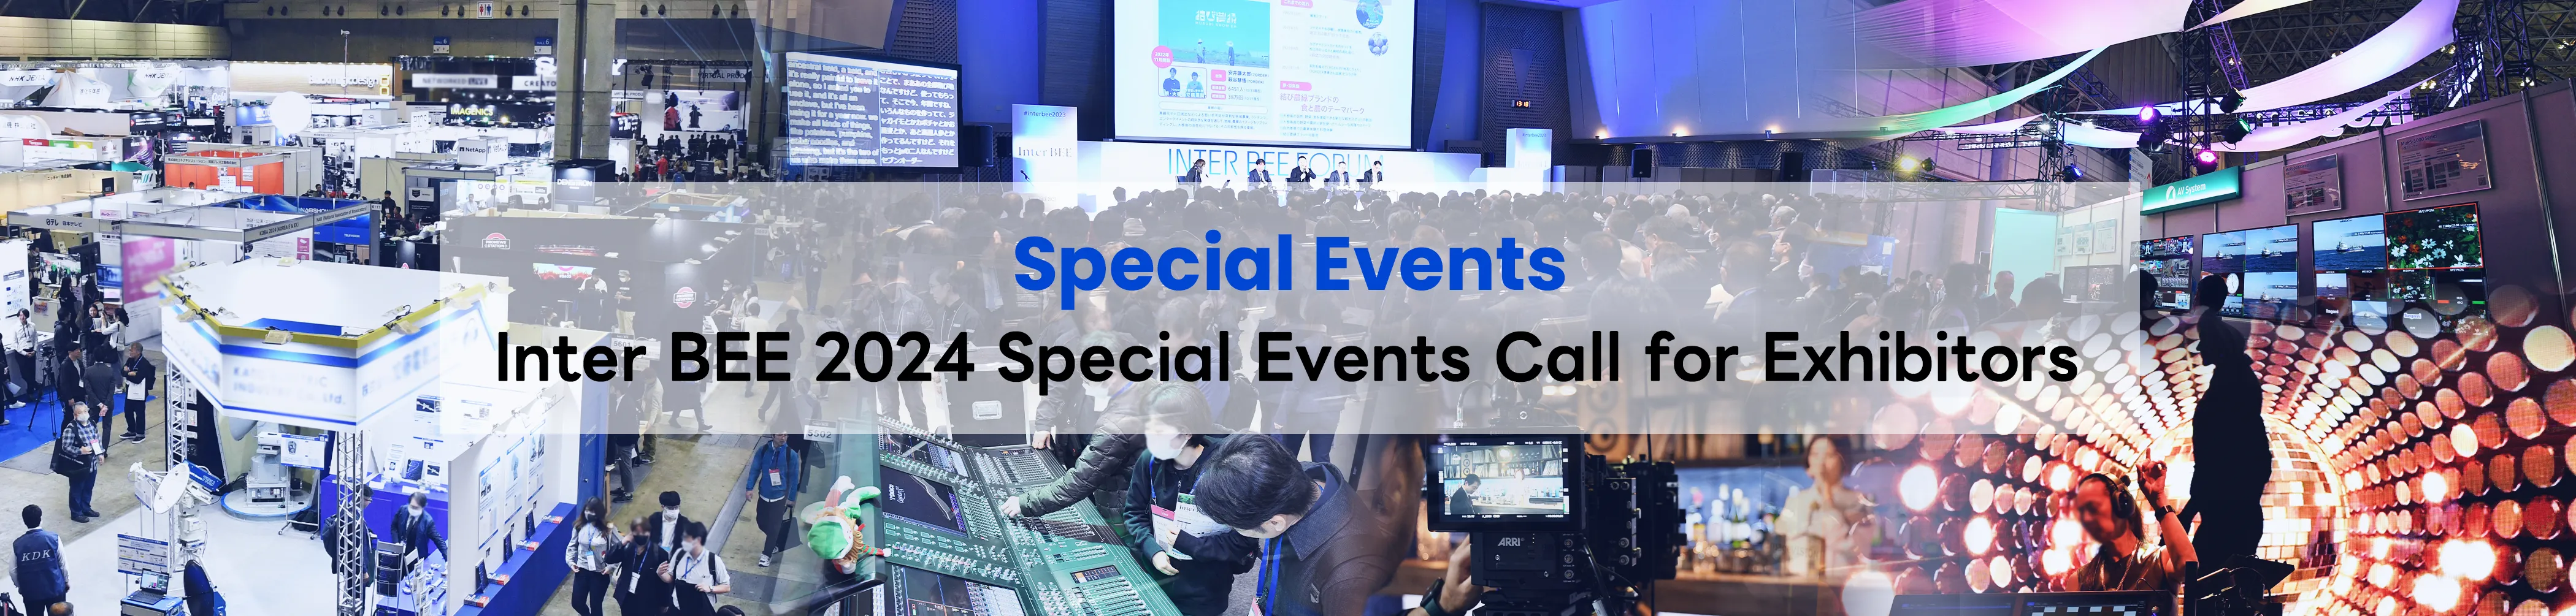 Inter BEE 2024 Special Events Call for Exhibitors